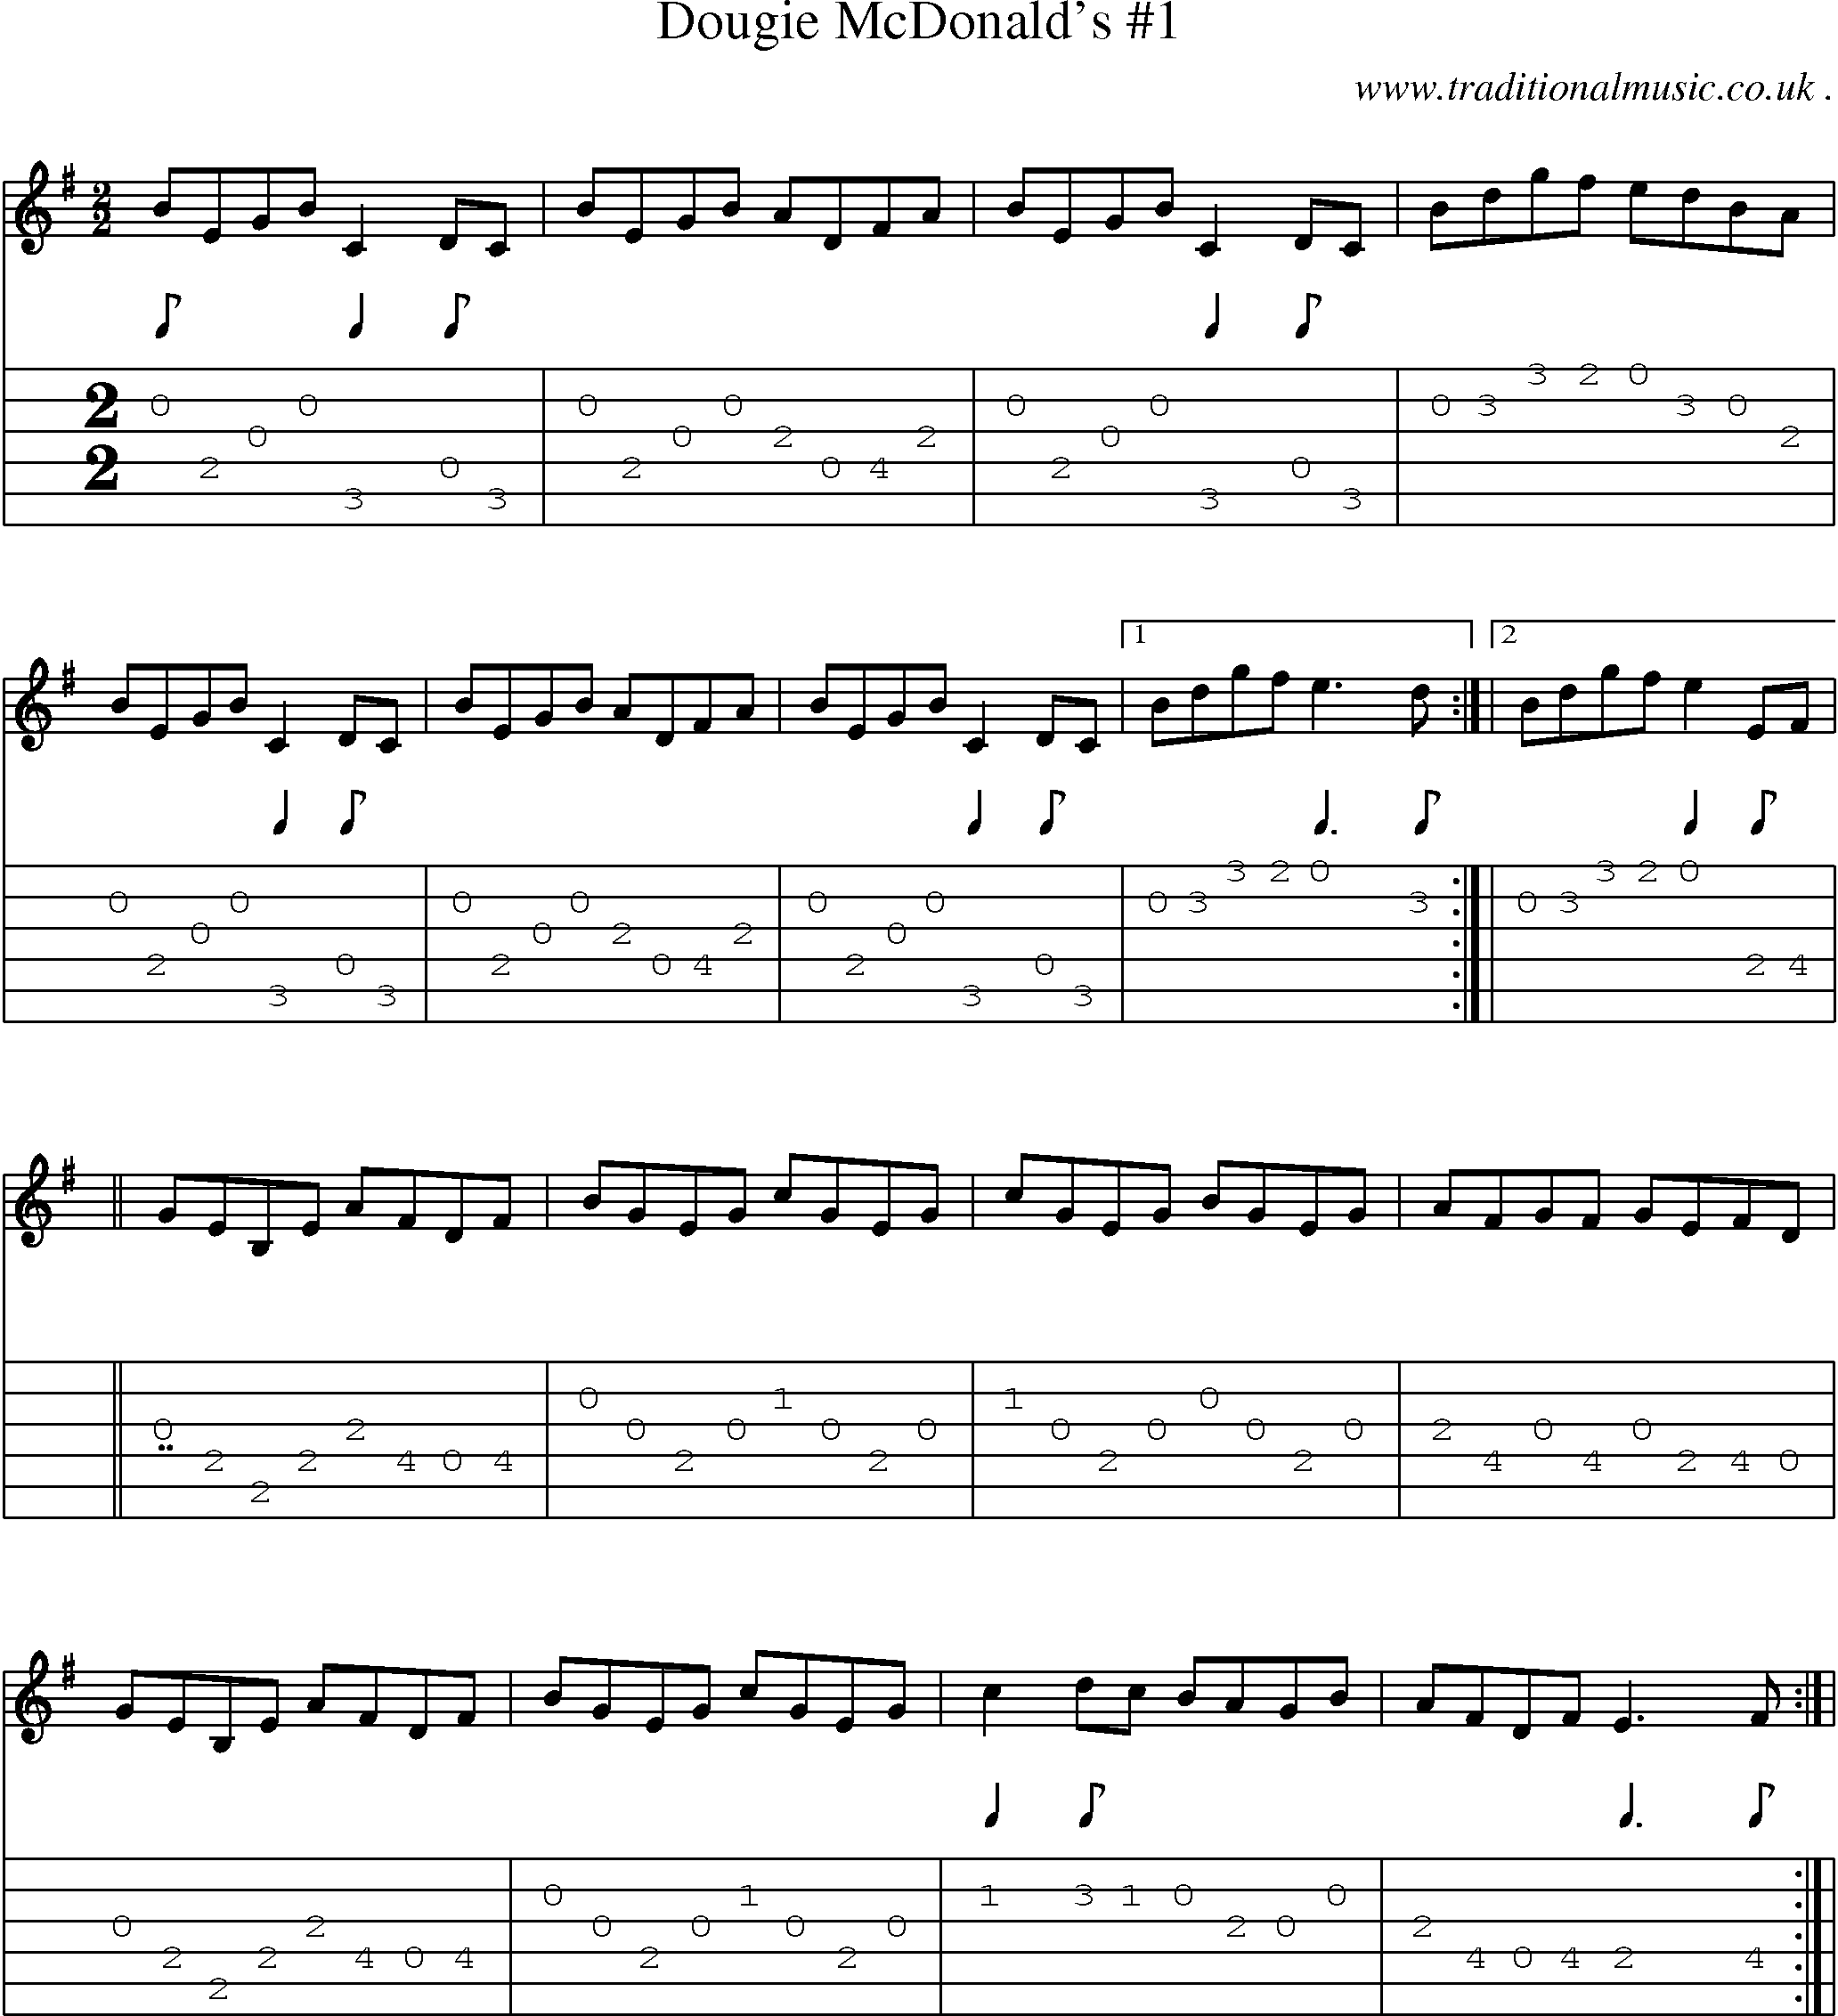 Sheet-Music and Guitar Tabs for Dougie Mcdonalds 1